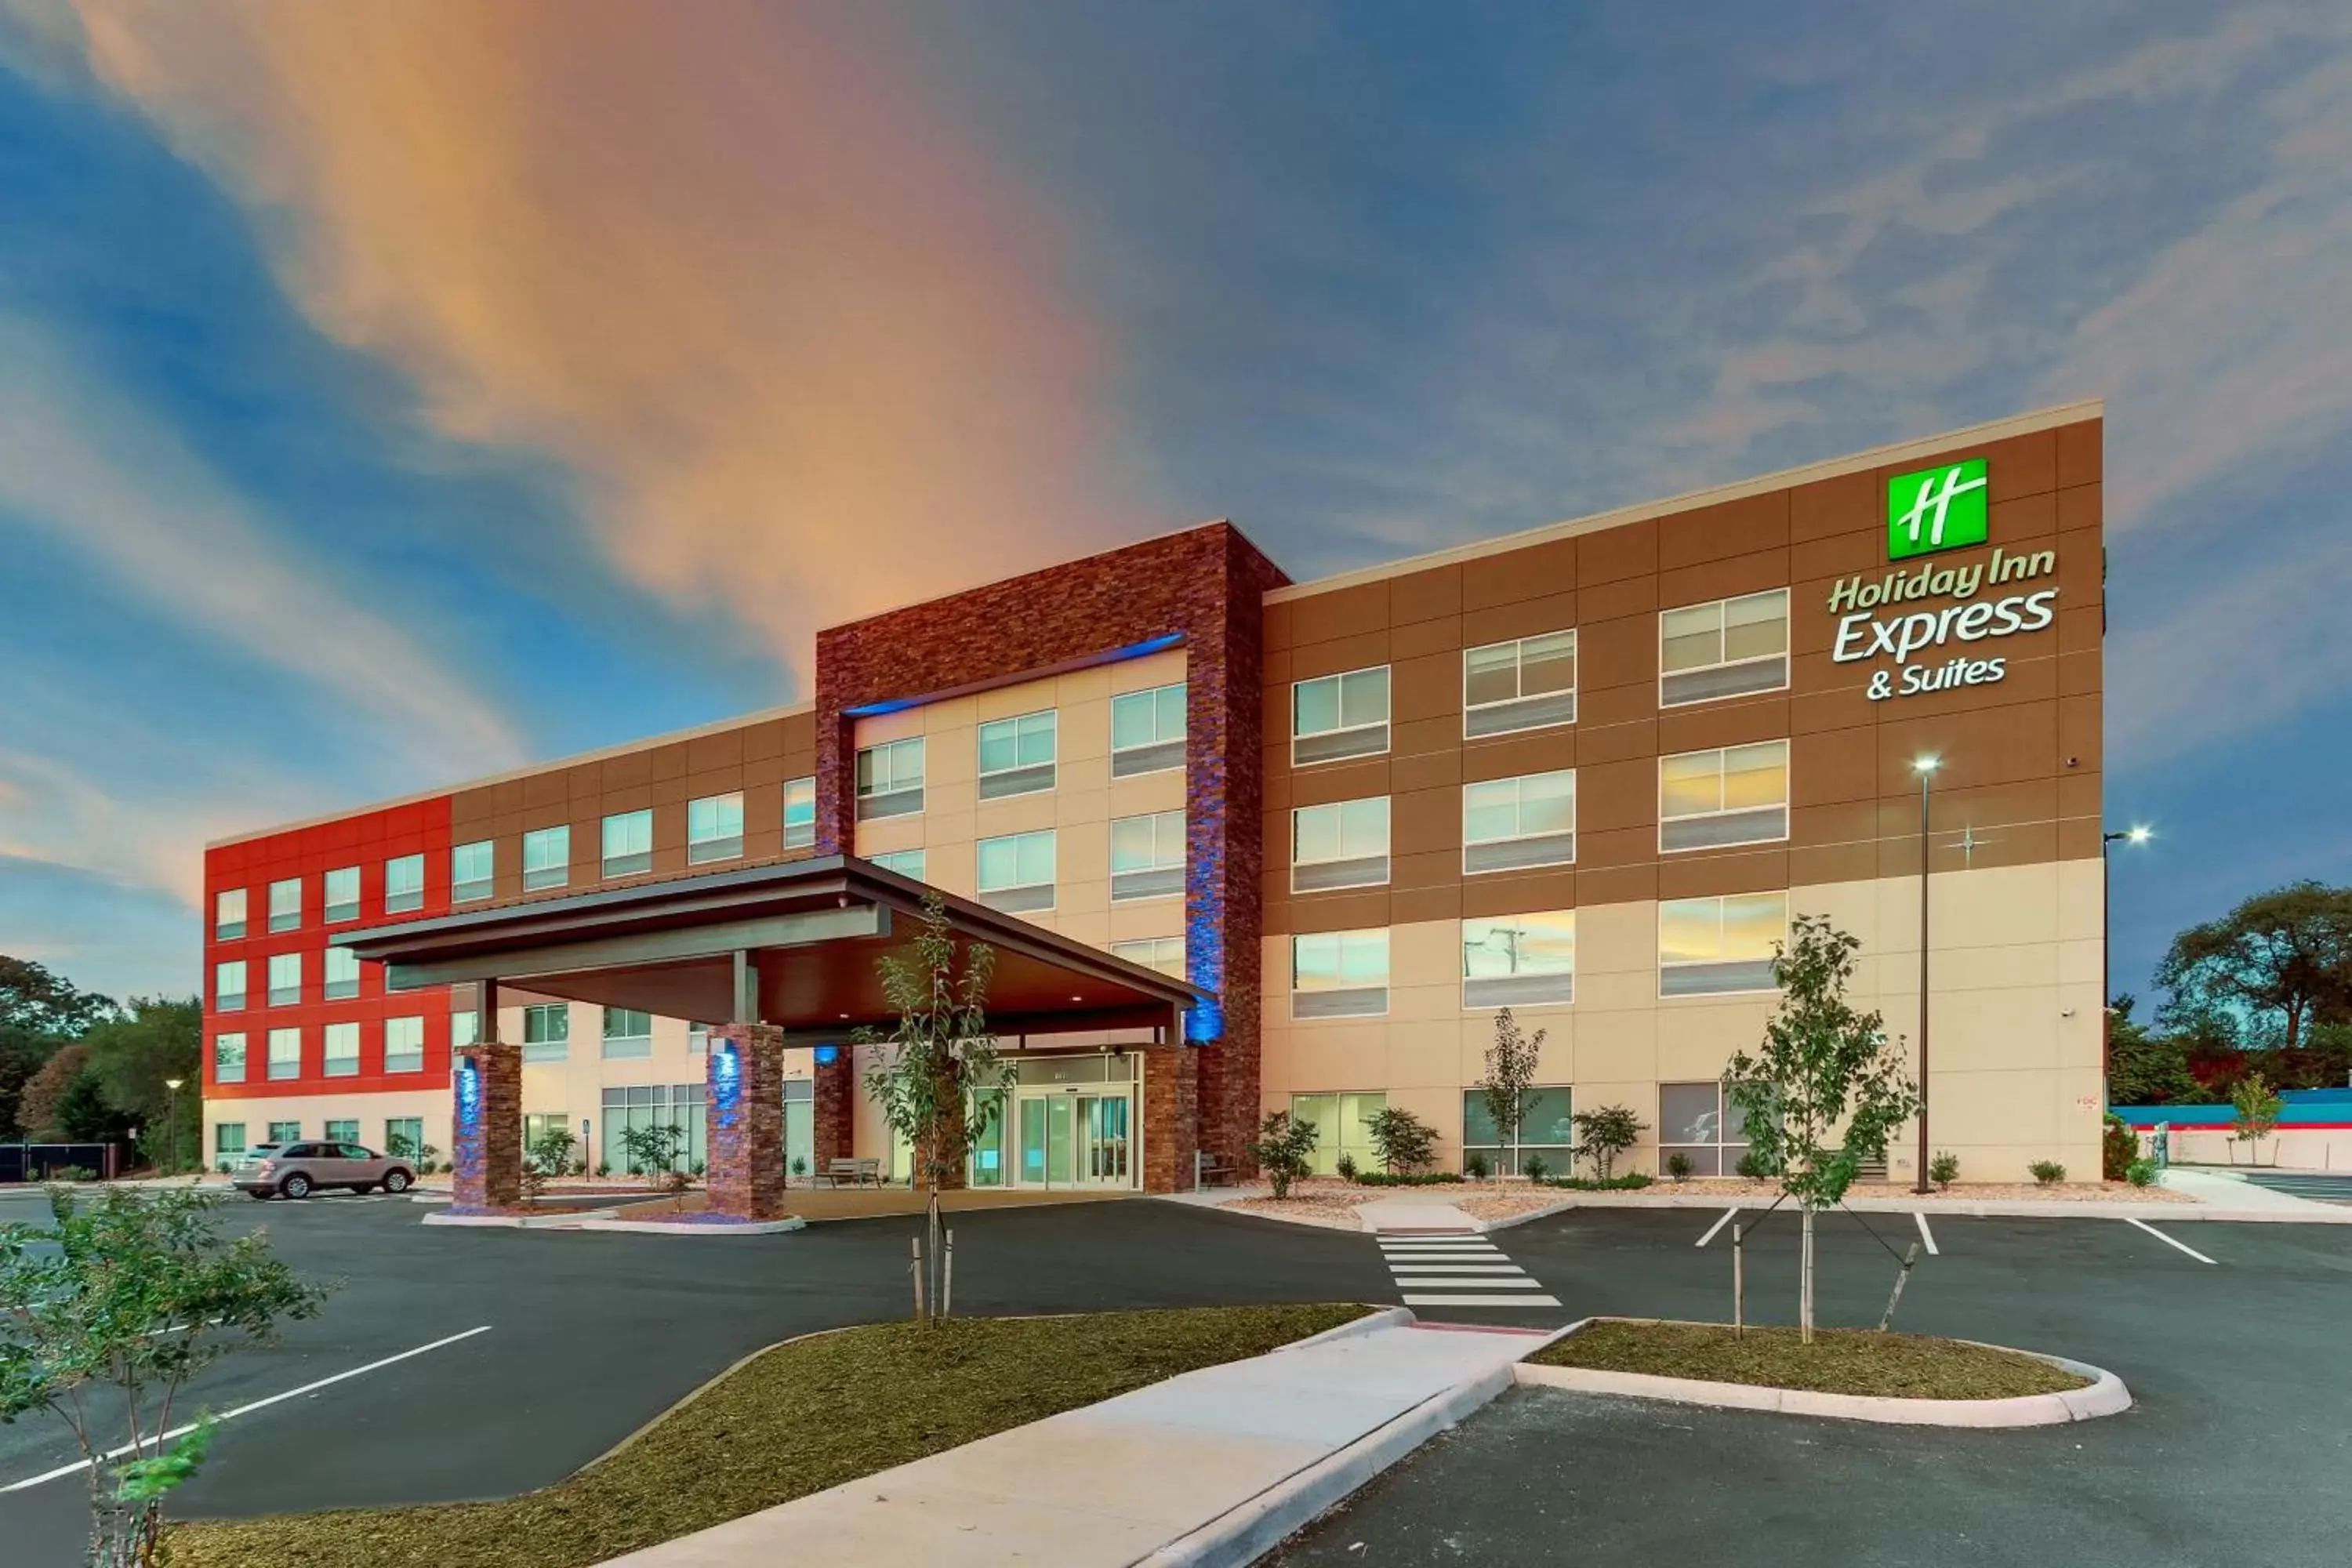 Property Building in Holiday Inn Express & Suites - Roanoke – Civic Center